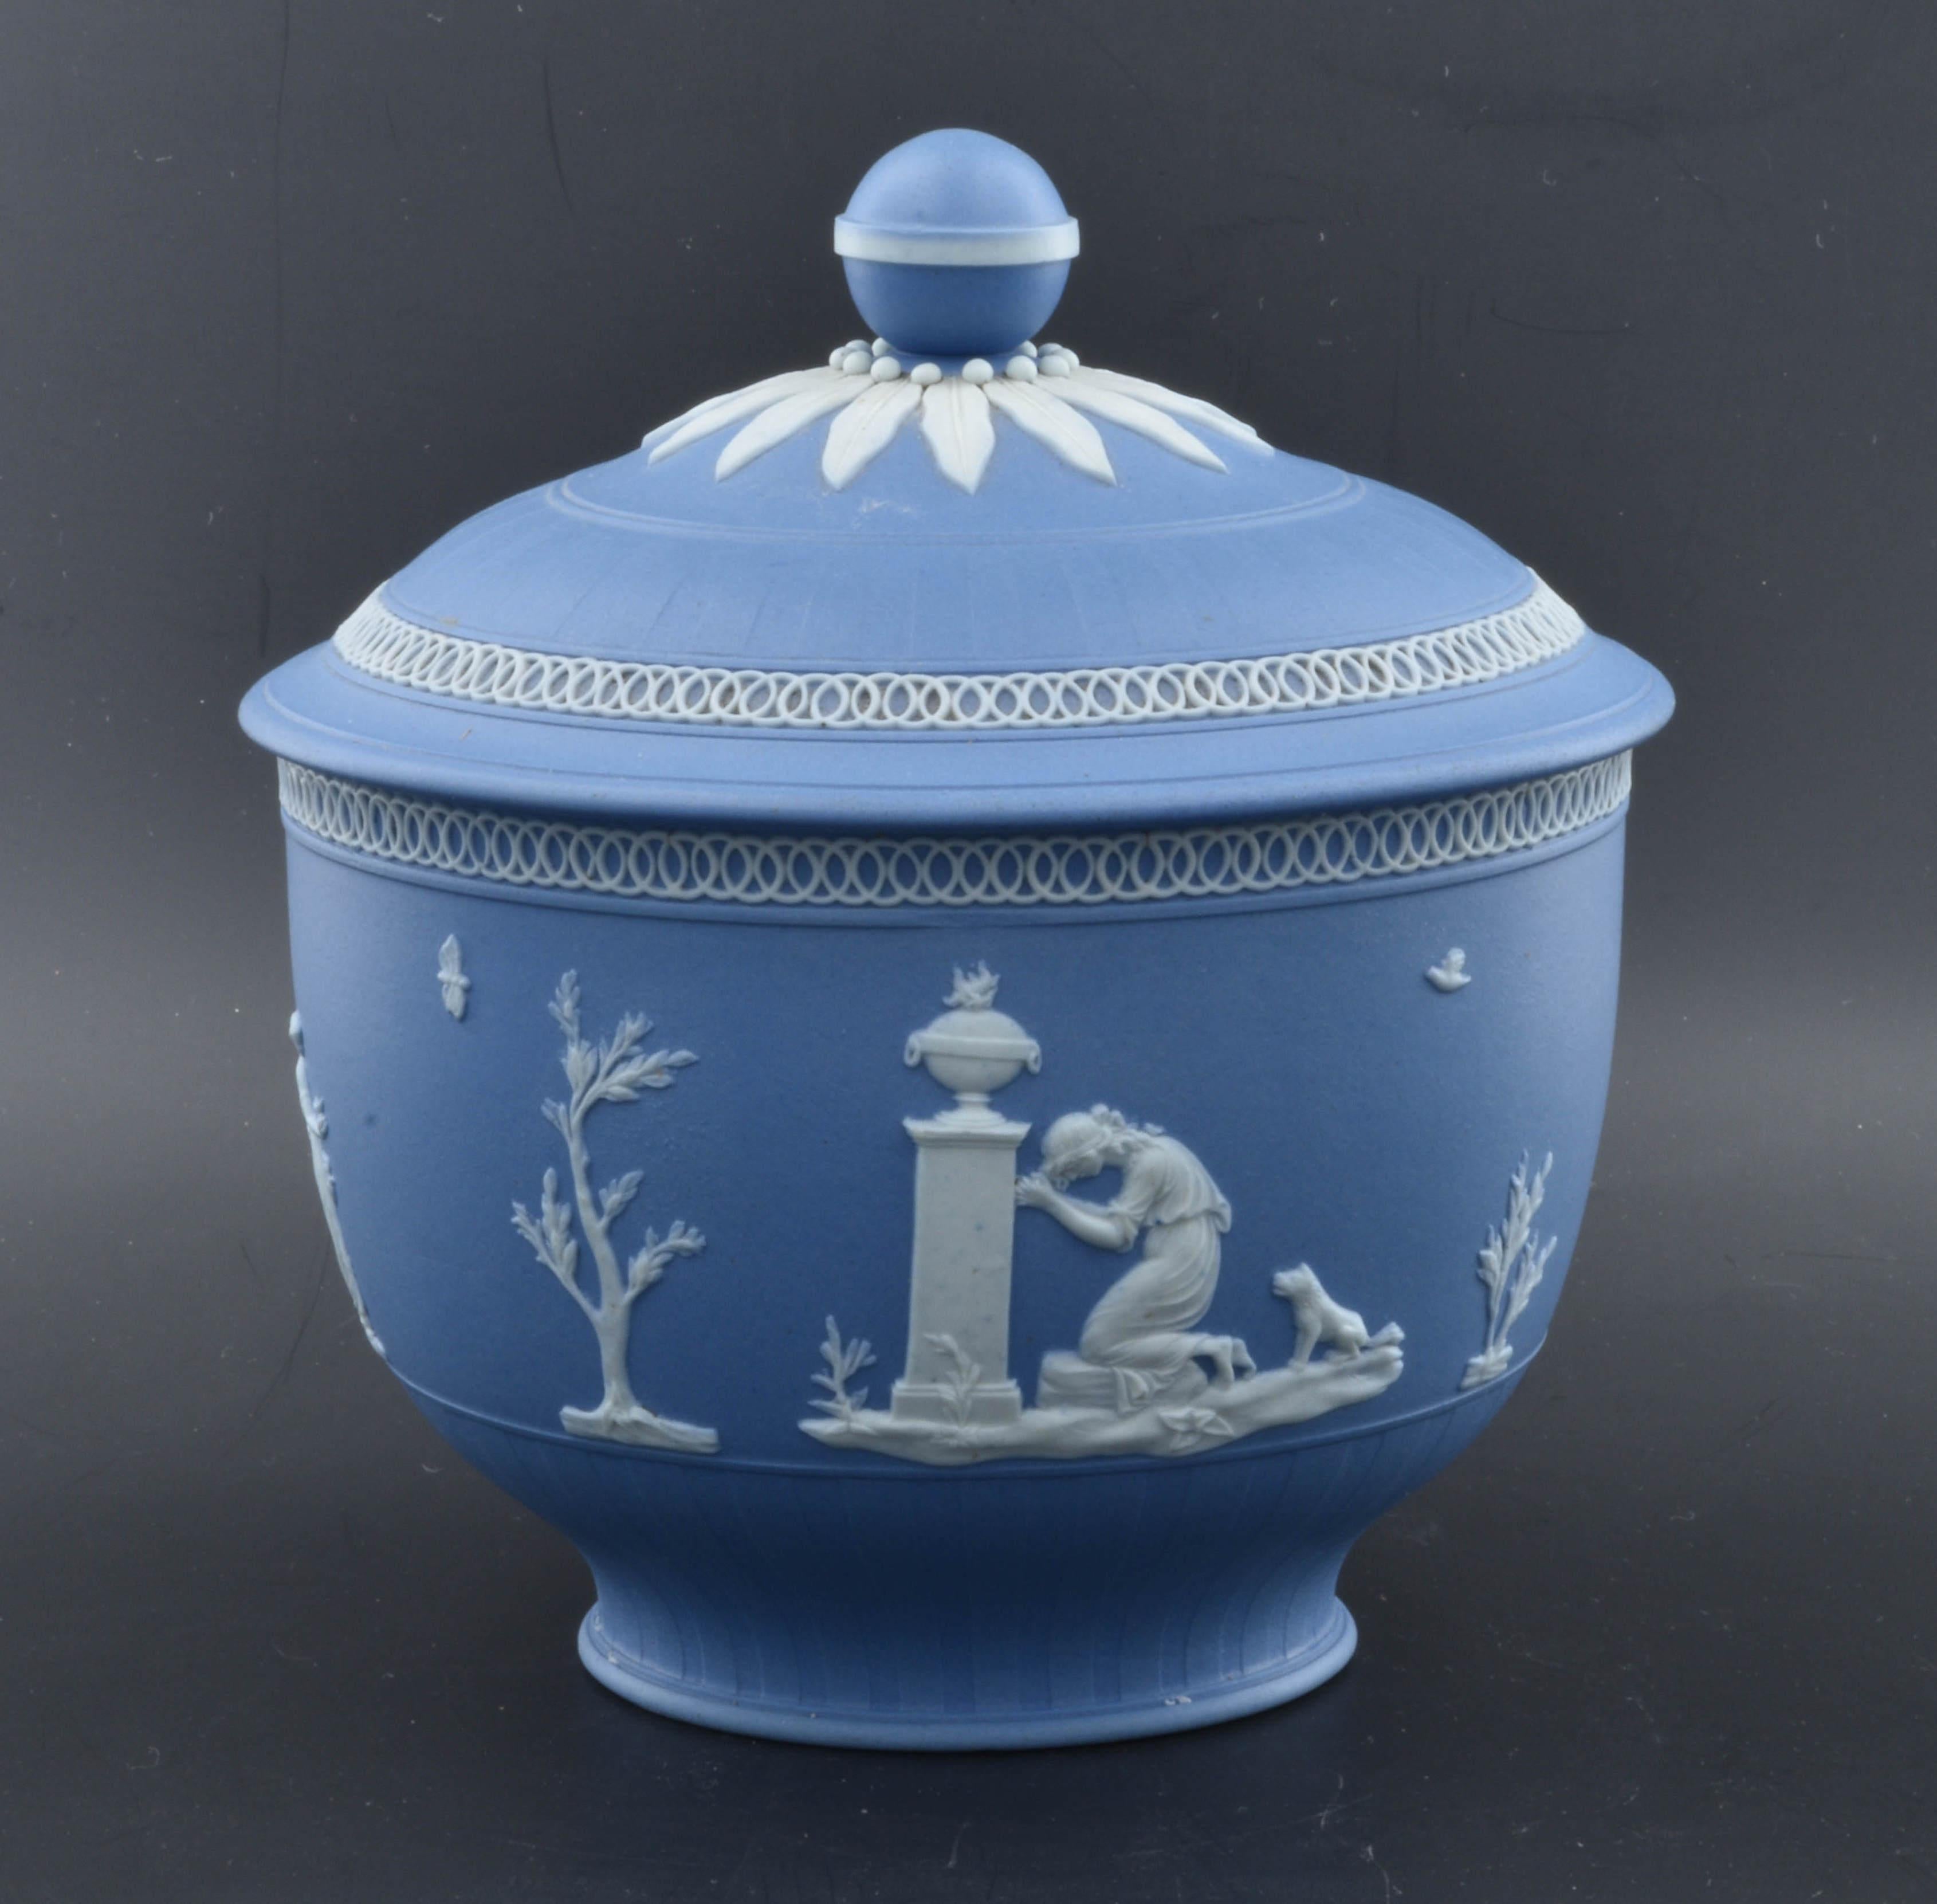 A fine sugar box in 'Adams Blue' jasperware. 

William Adams was apprenticed to Josiah Wedgwood, and helped with the development of jasperware. He later founded his own, very successful pottery, and made very fine jasperwar, usually in a distinctive